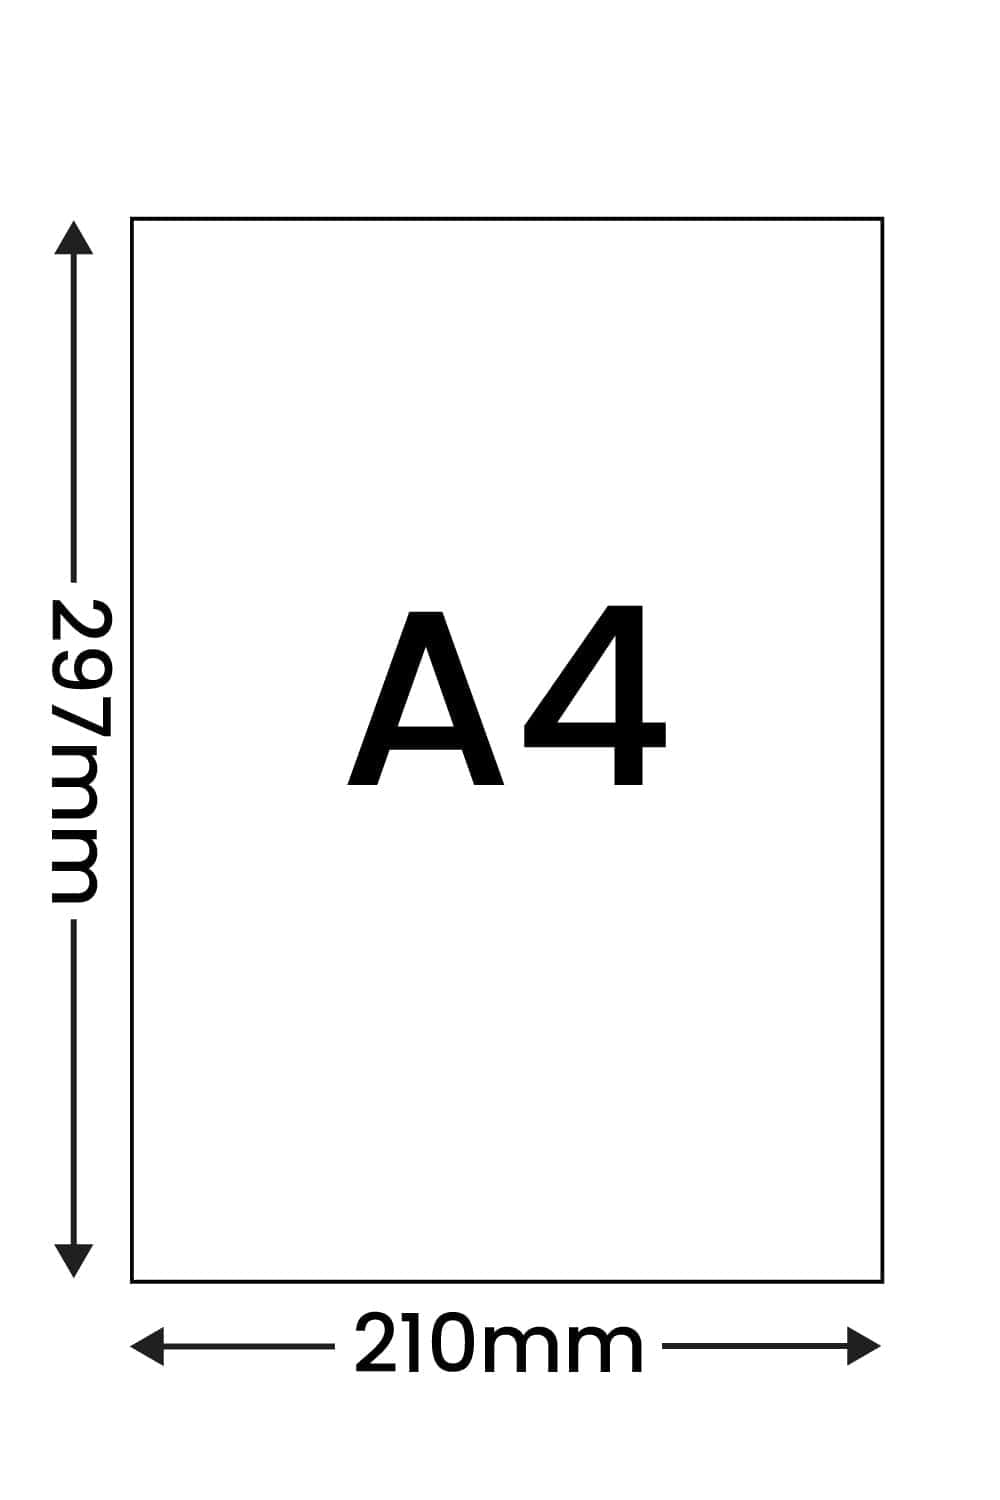 Diagram showing measurements of A4 photo frame